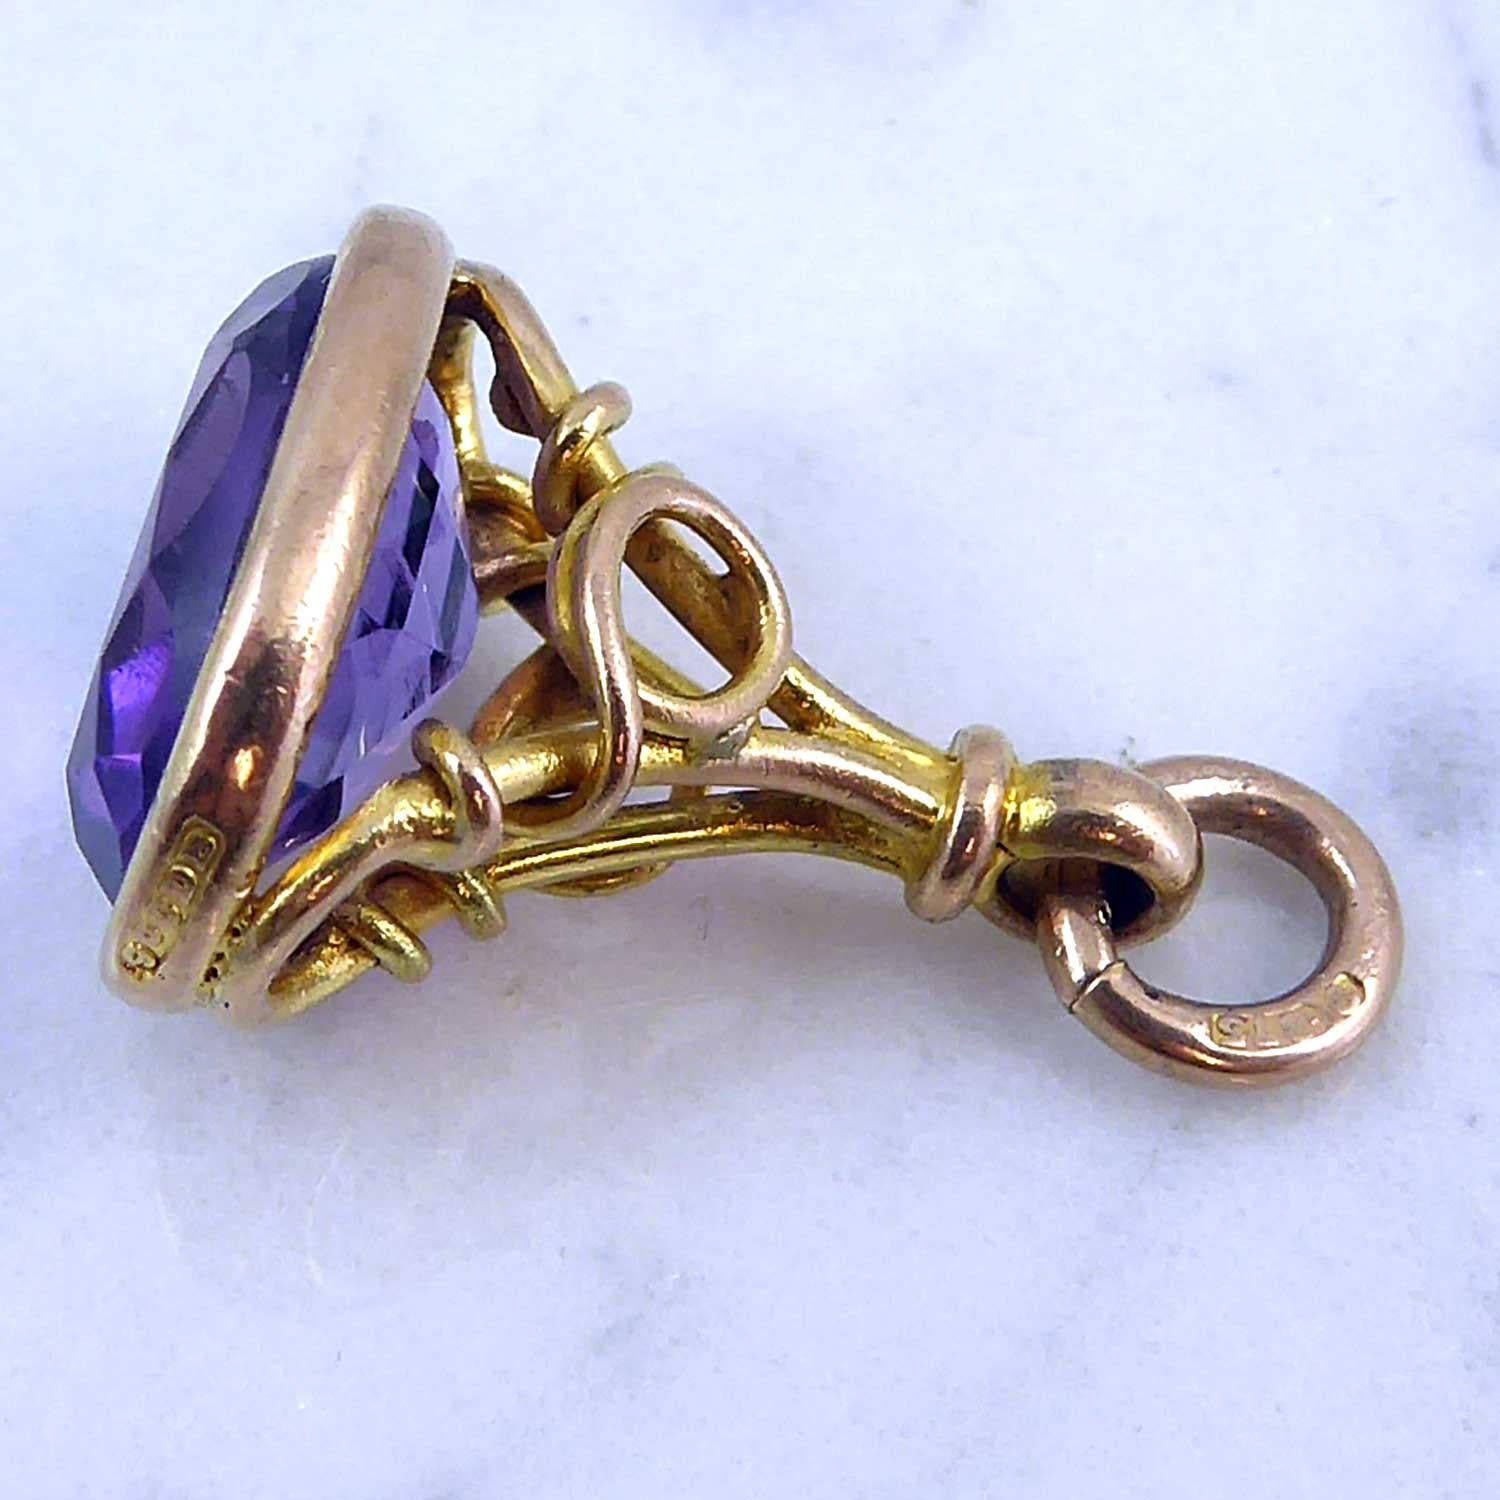 Late Victorian Early Edwardian Antique Gold and Amethyst Pendant Mini Fob 1